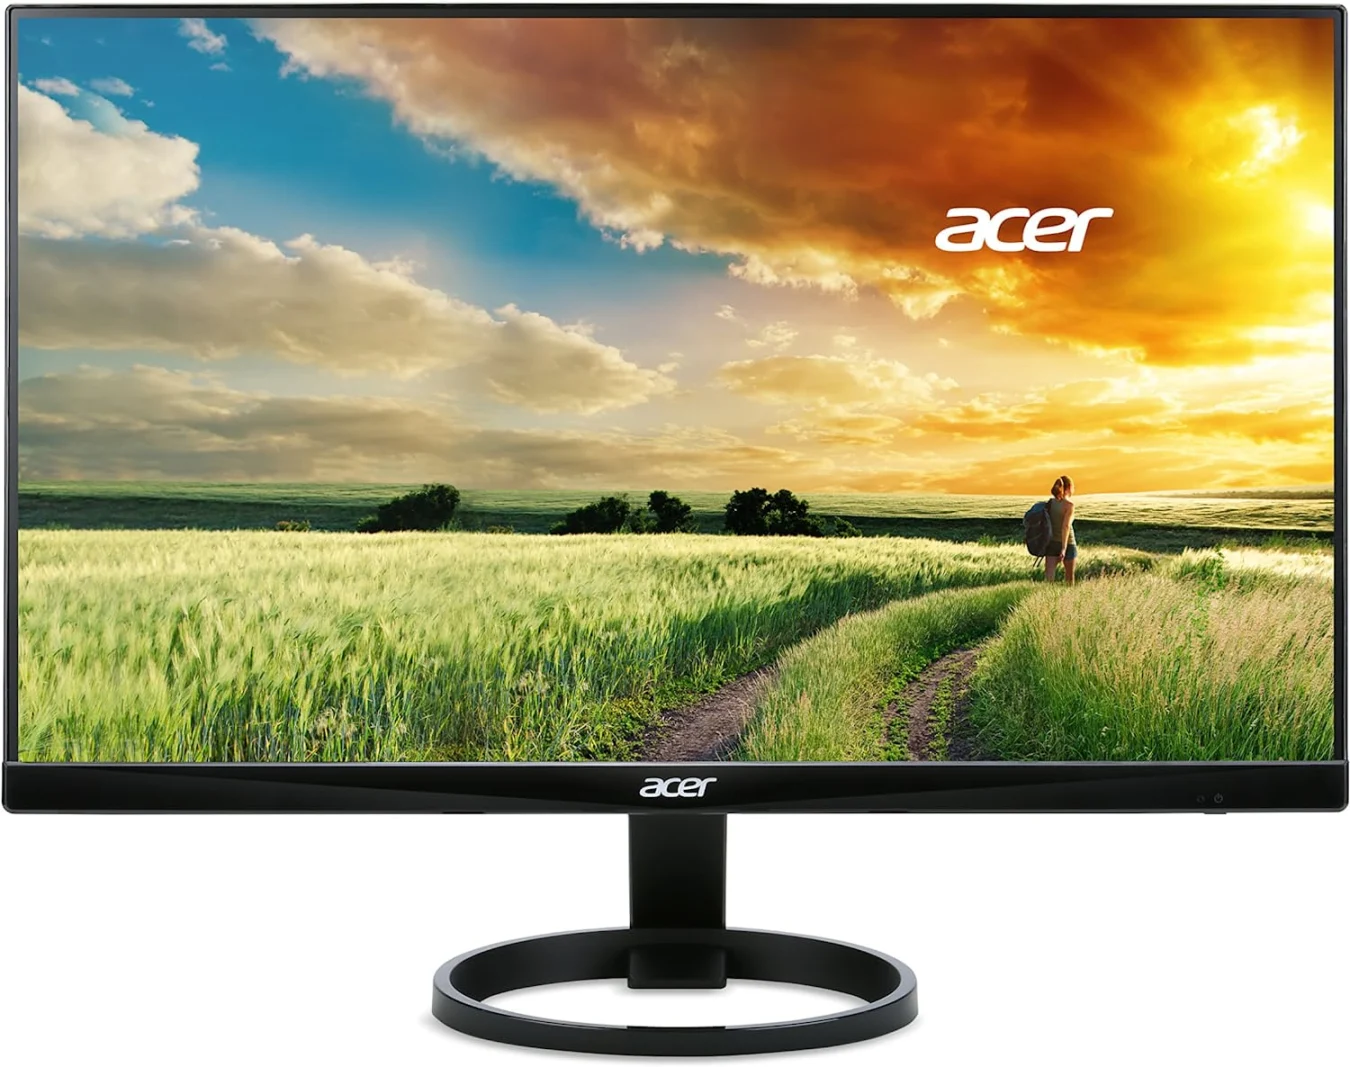 Acer 23.8-inch FHD IPS monitor